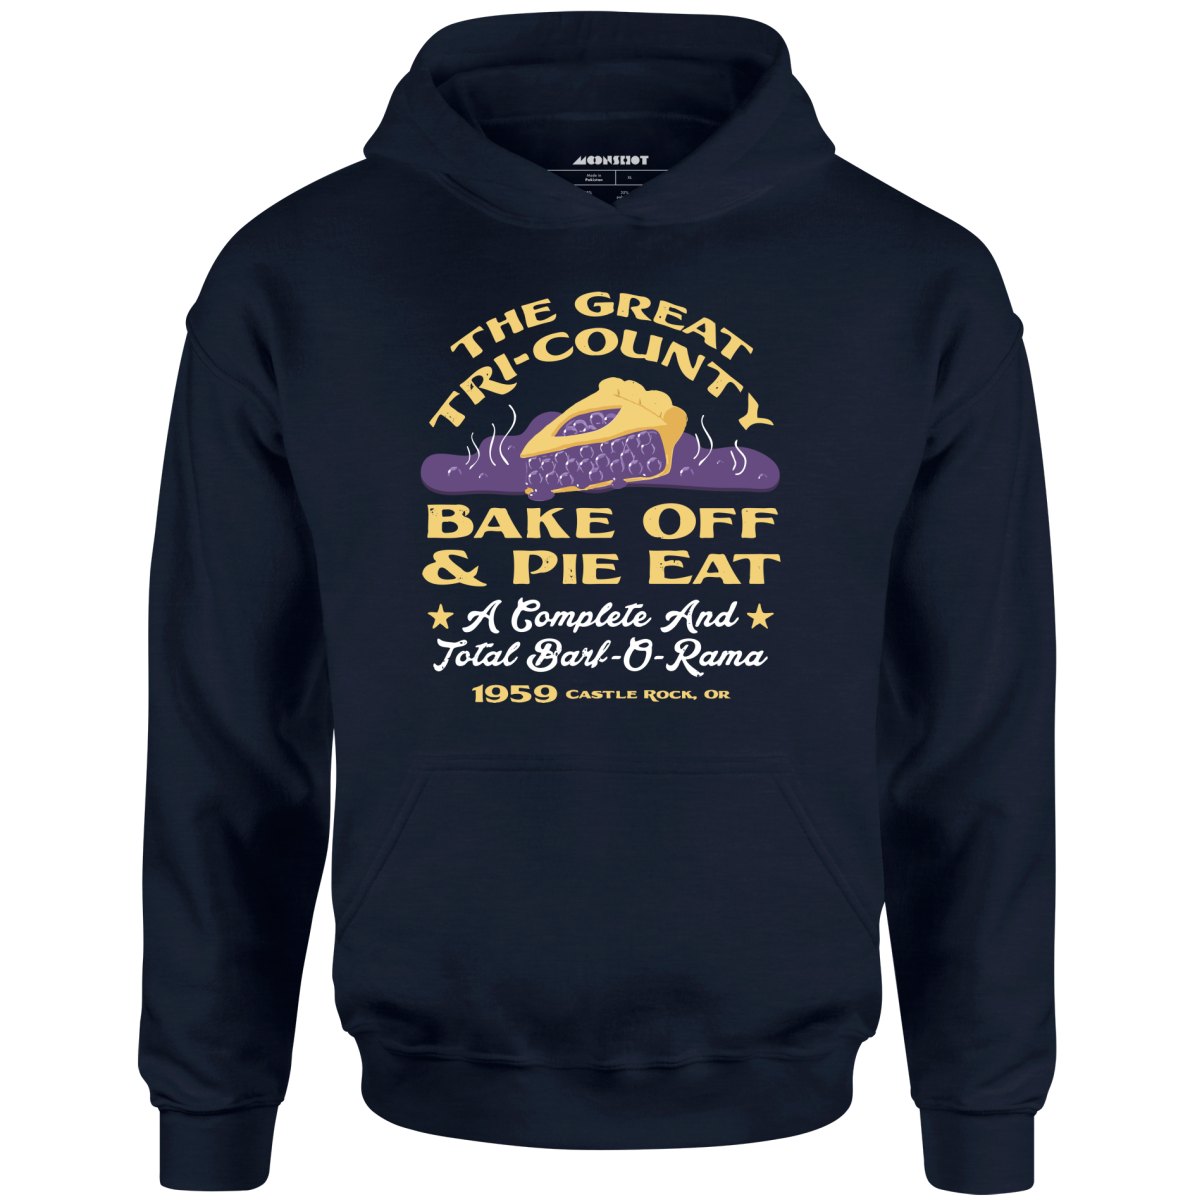 The Great Tri-County Bake Off & Pie Eat - Unisex Hoodie